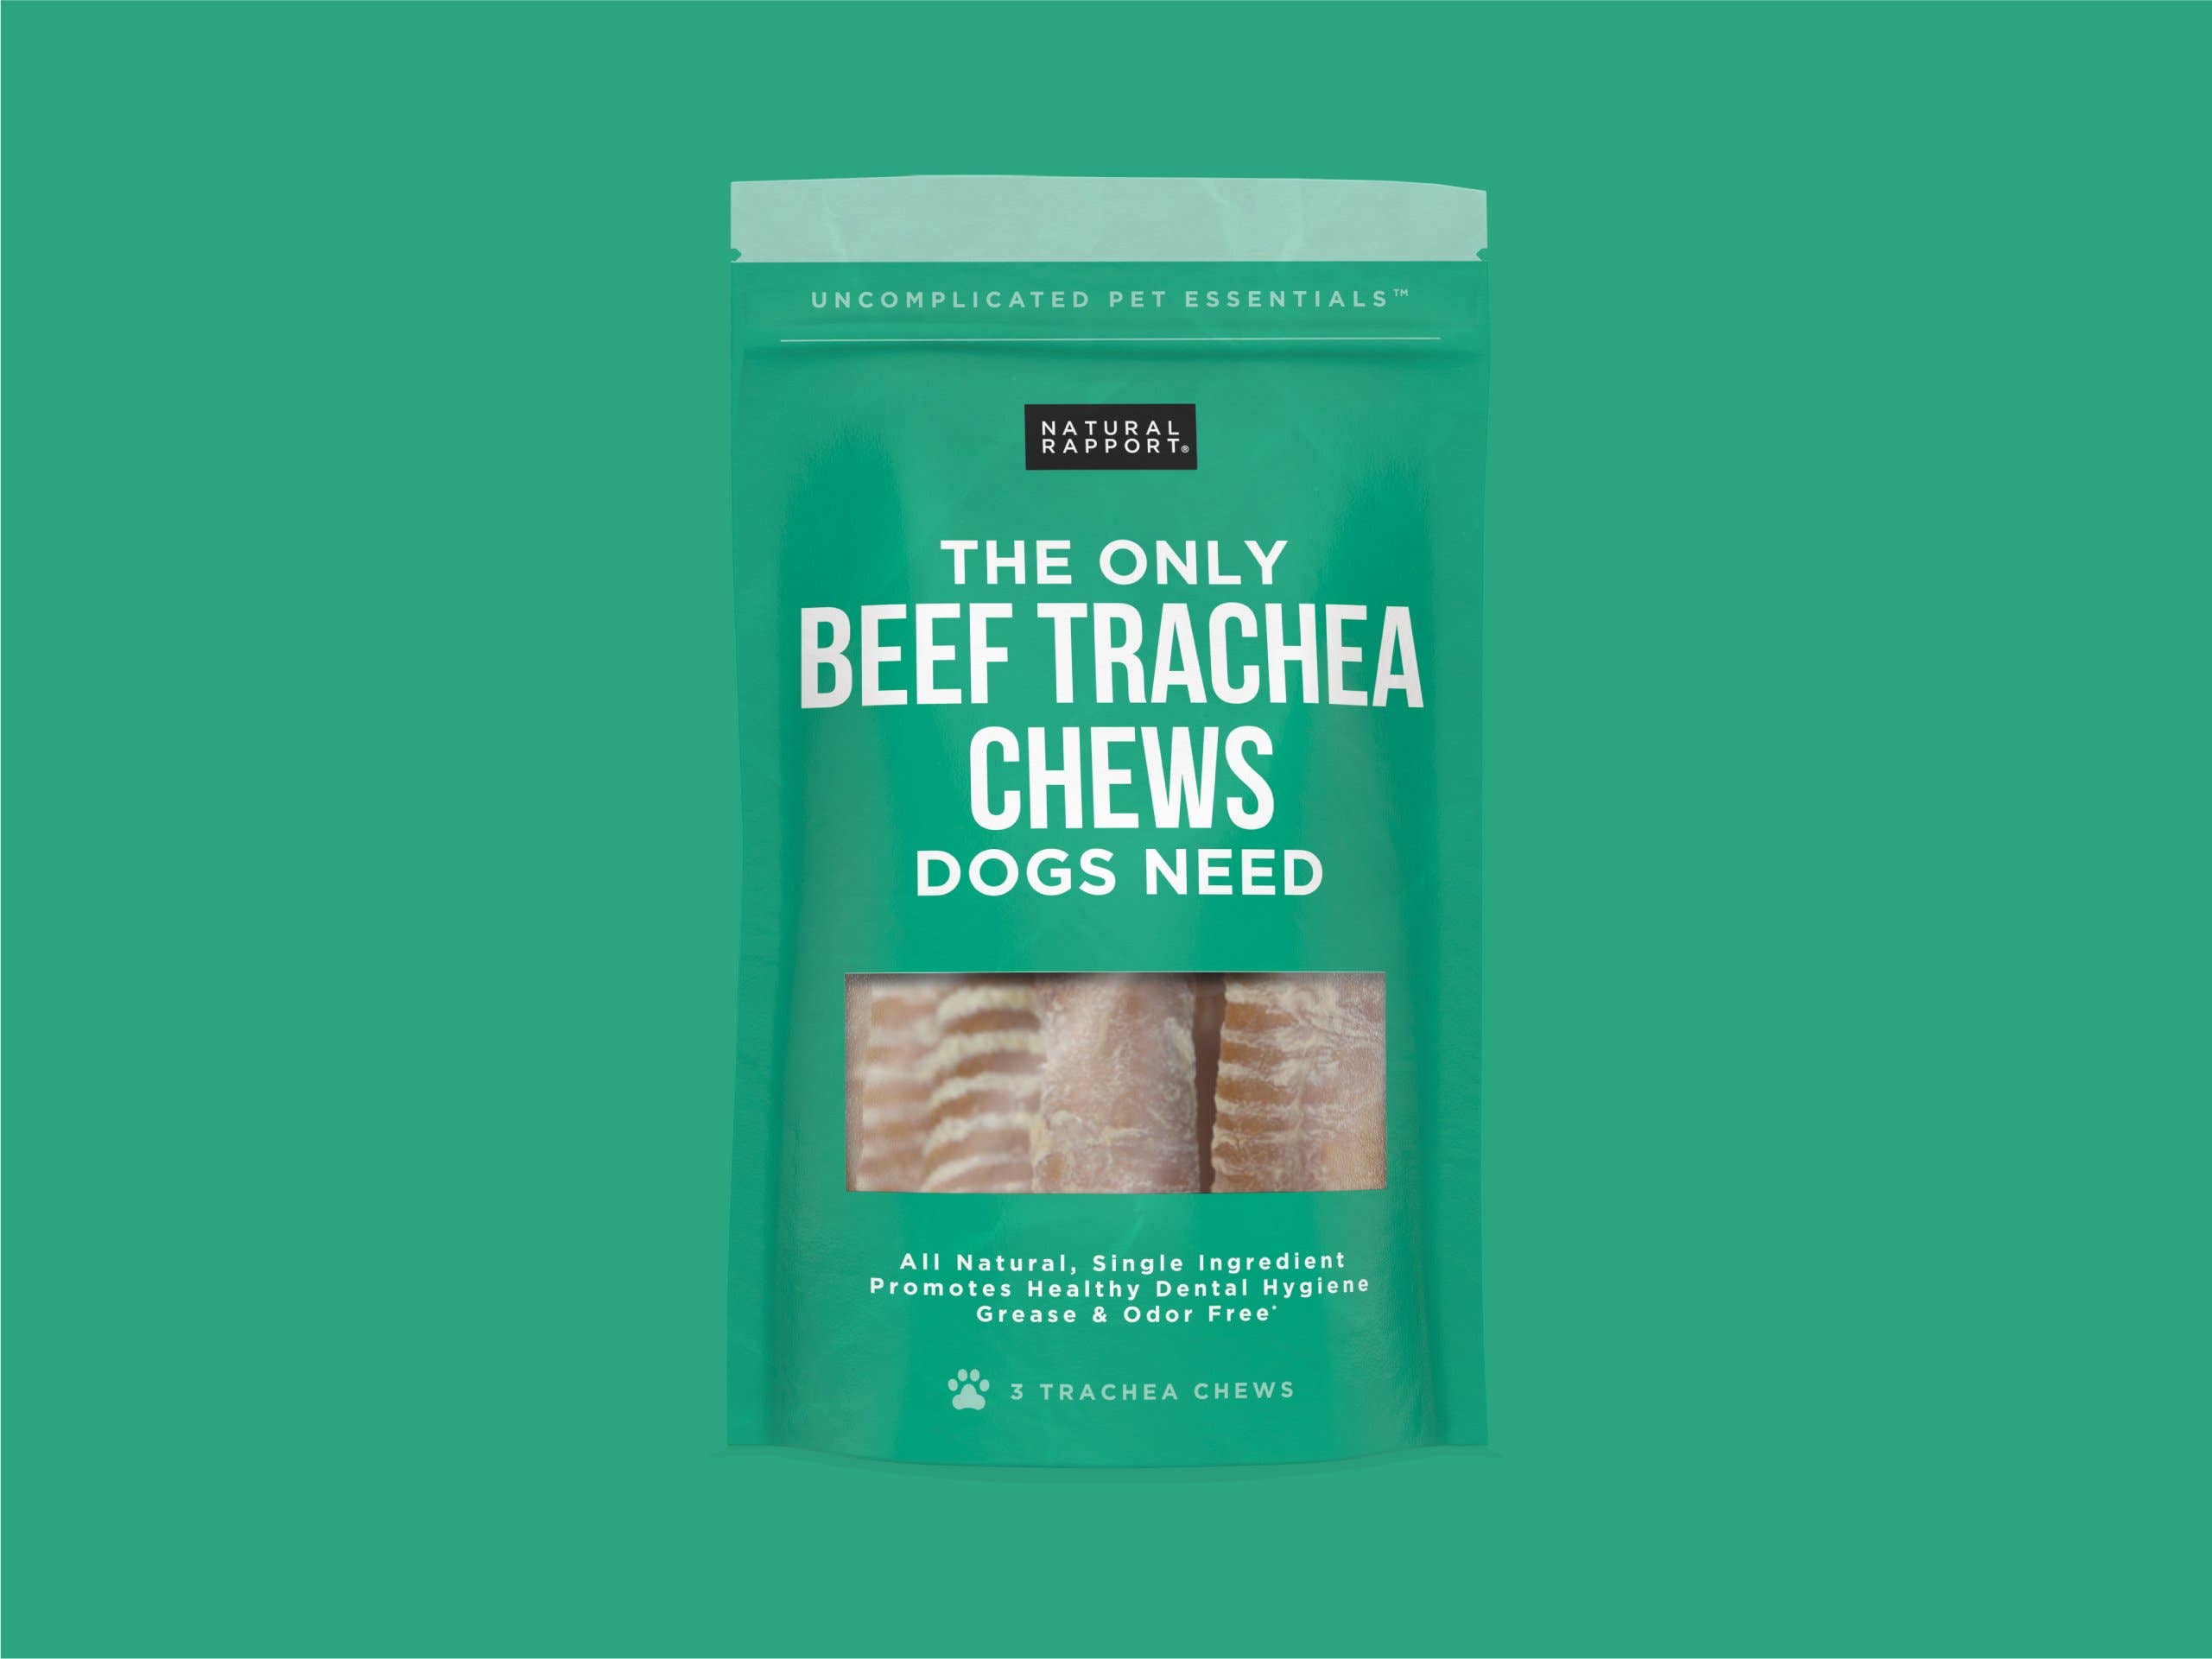 Natural Rapport - The Only Beef Trachea Chews Dogs Need